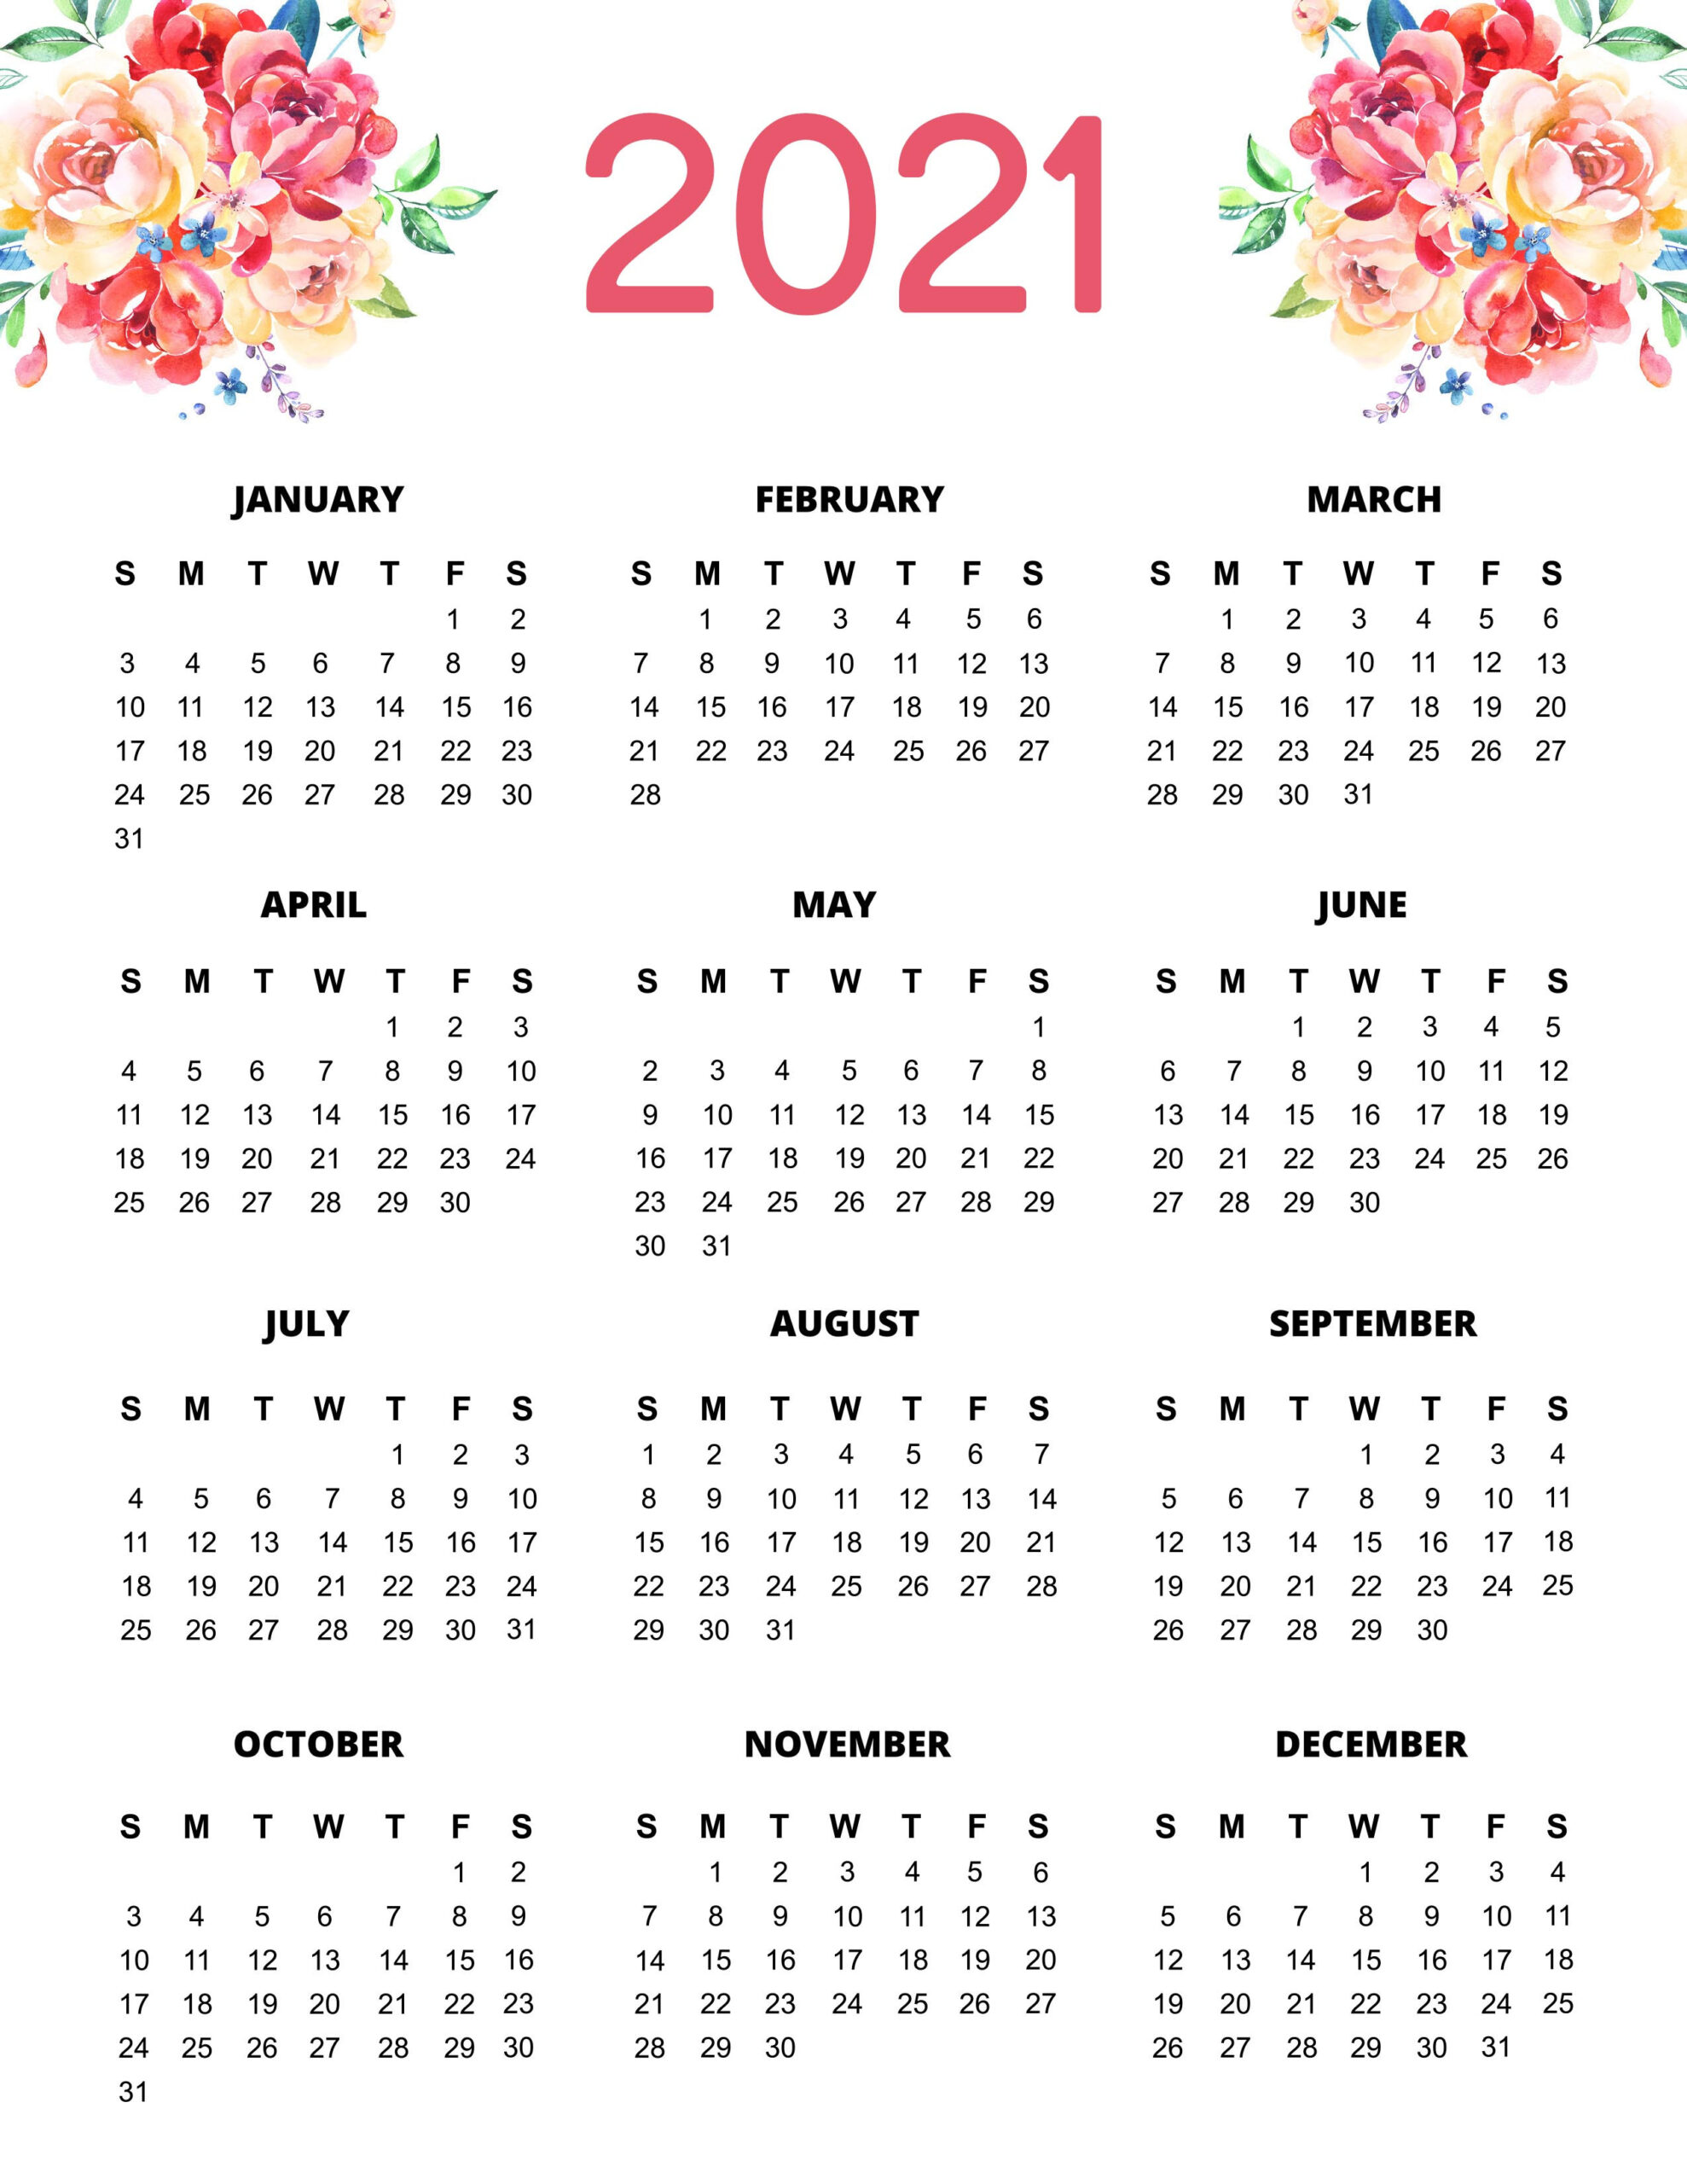 January 2021 Monthly Meal Plan On A Budget - Family Fresh-2021 Bill Calendar